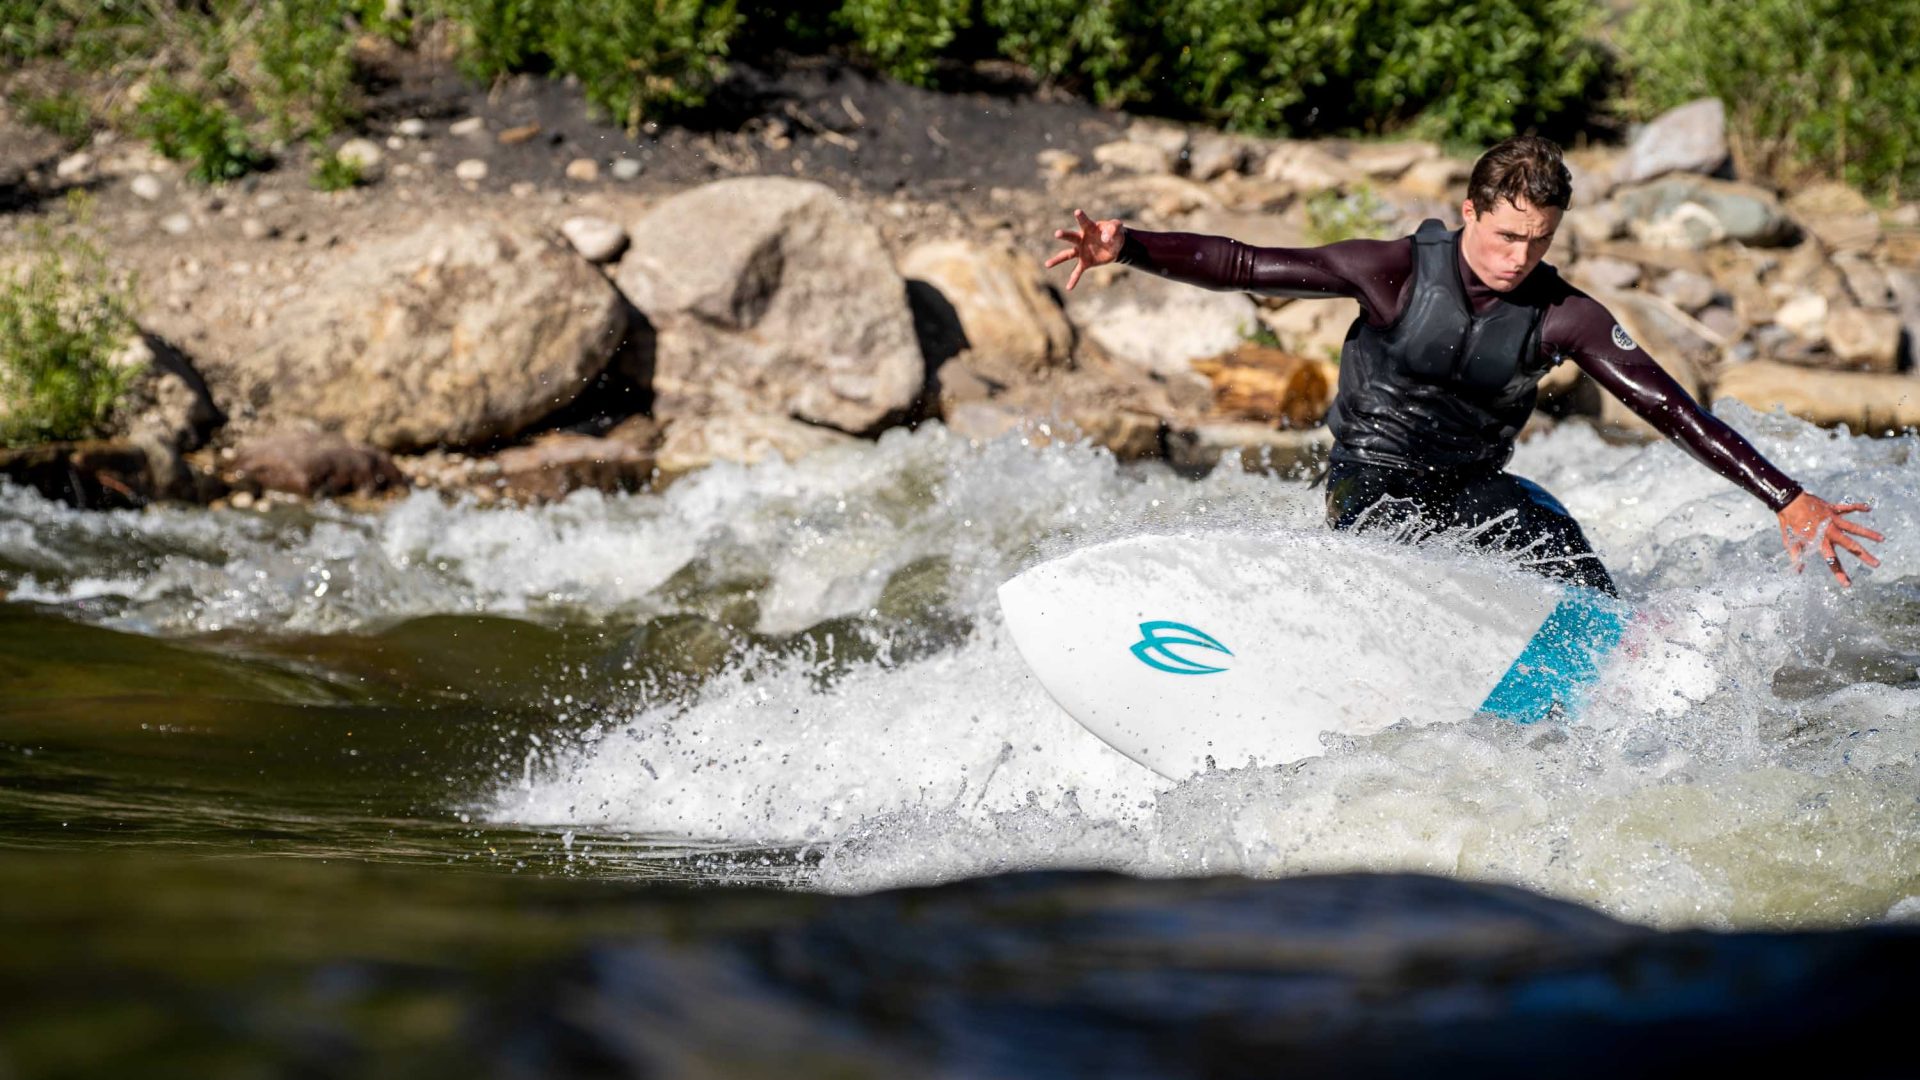 A man surfs on a river. He wears a full wetsuit.